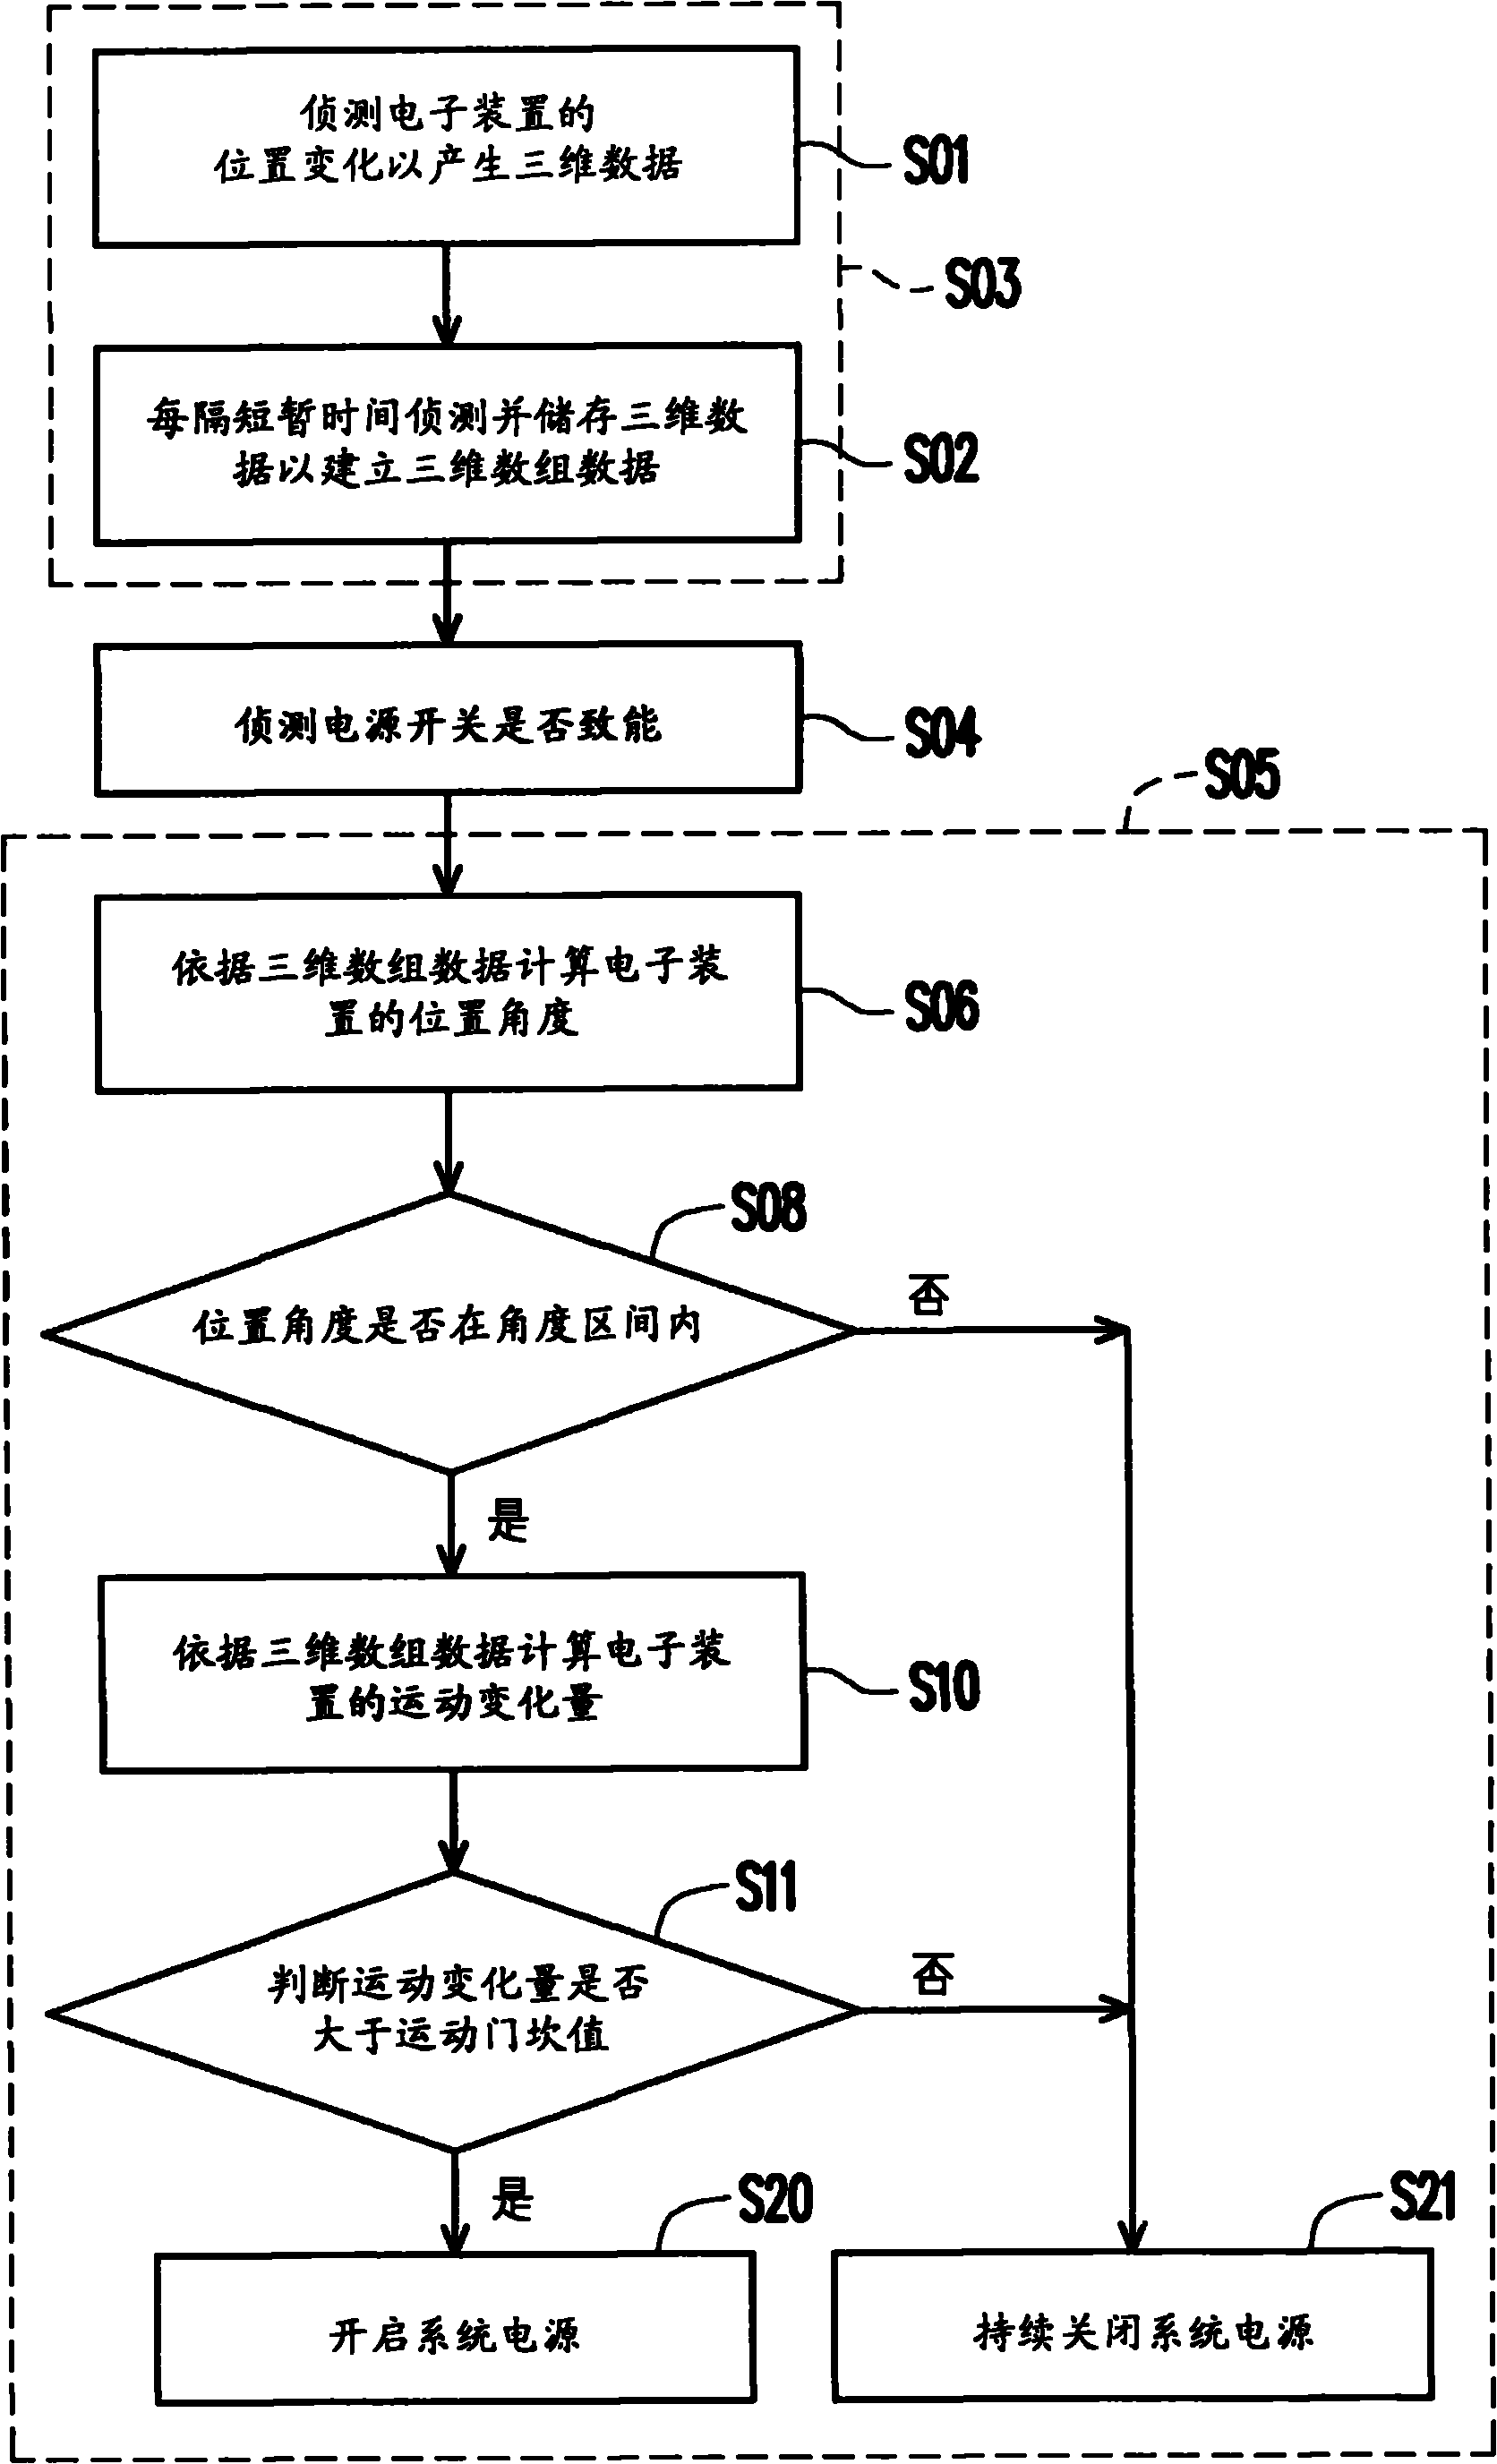 Method and device for avoiding erroneous touch of power switch